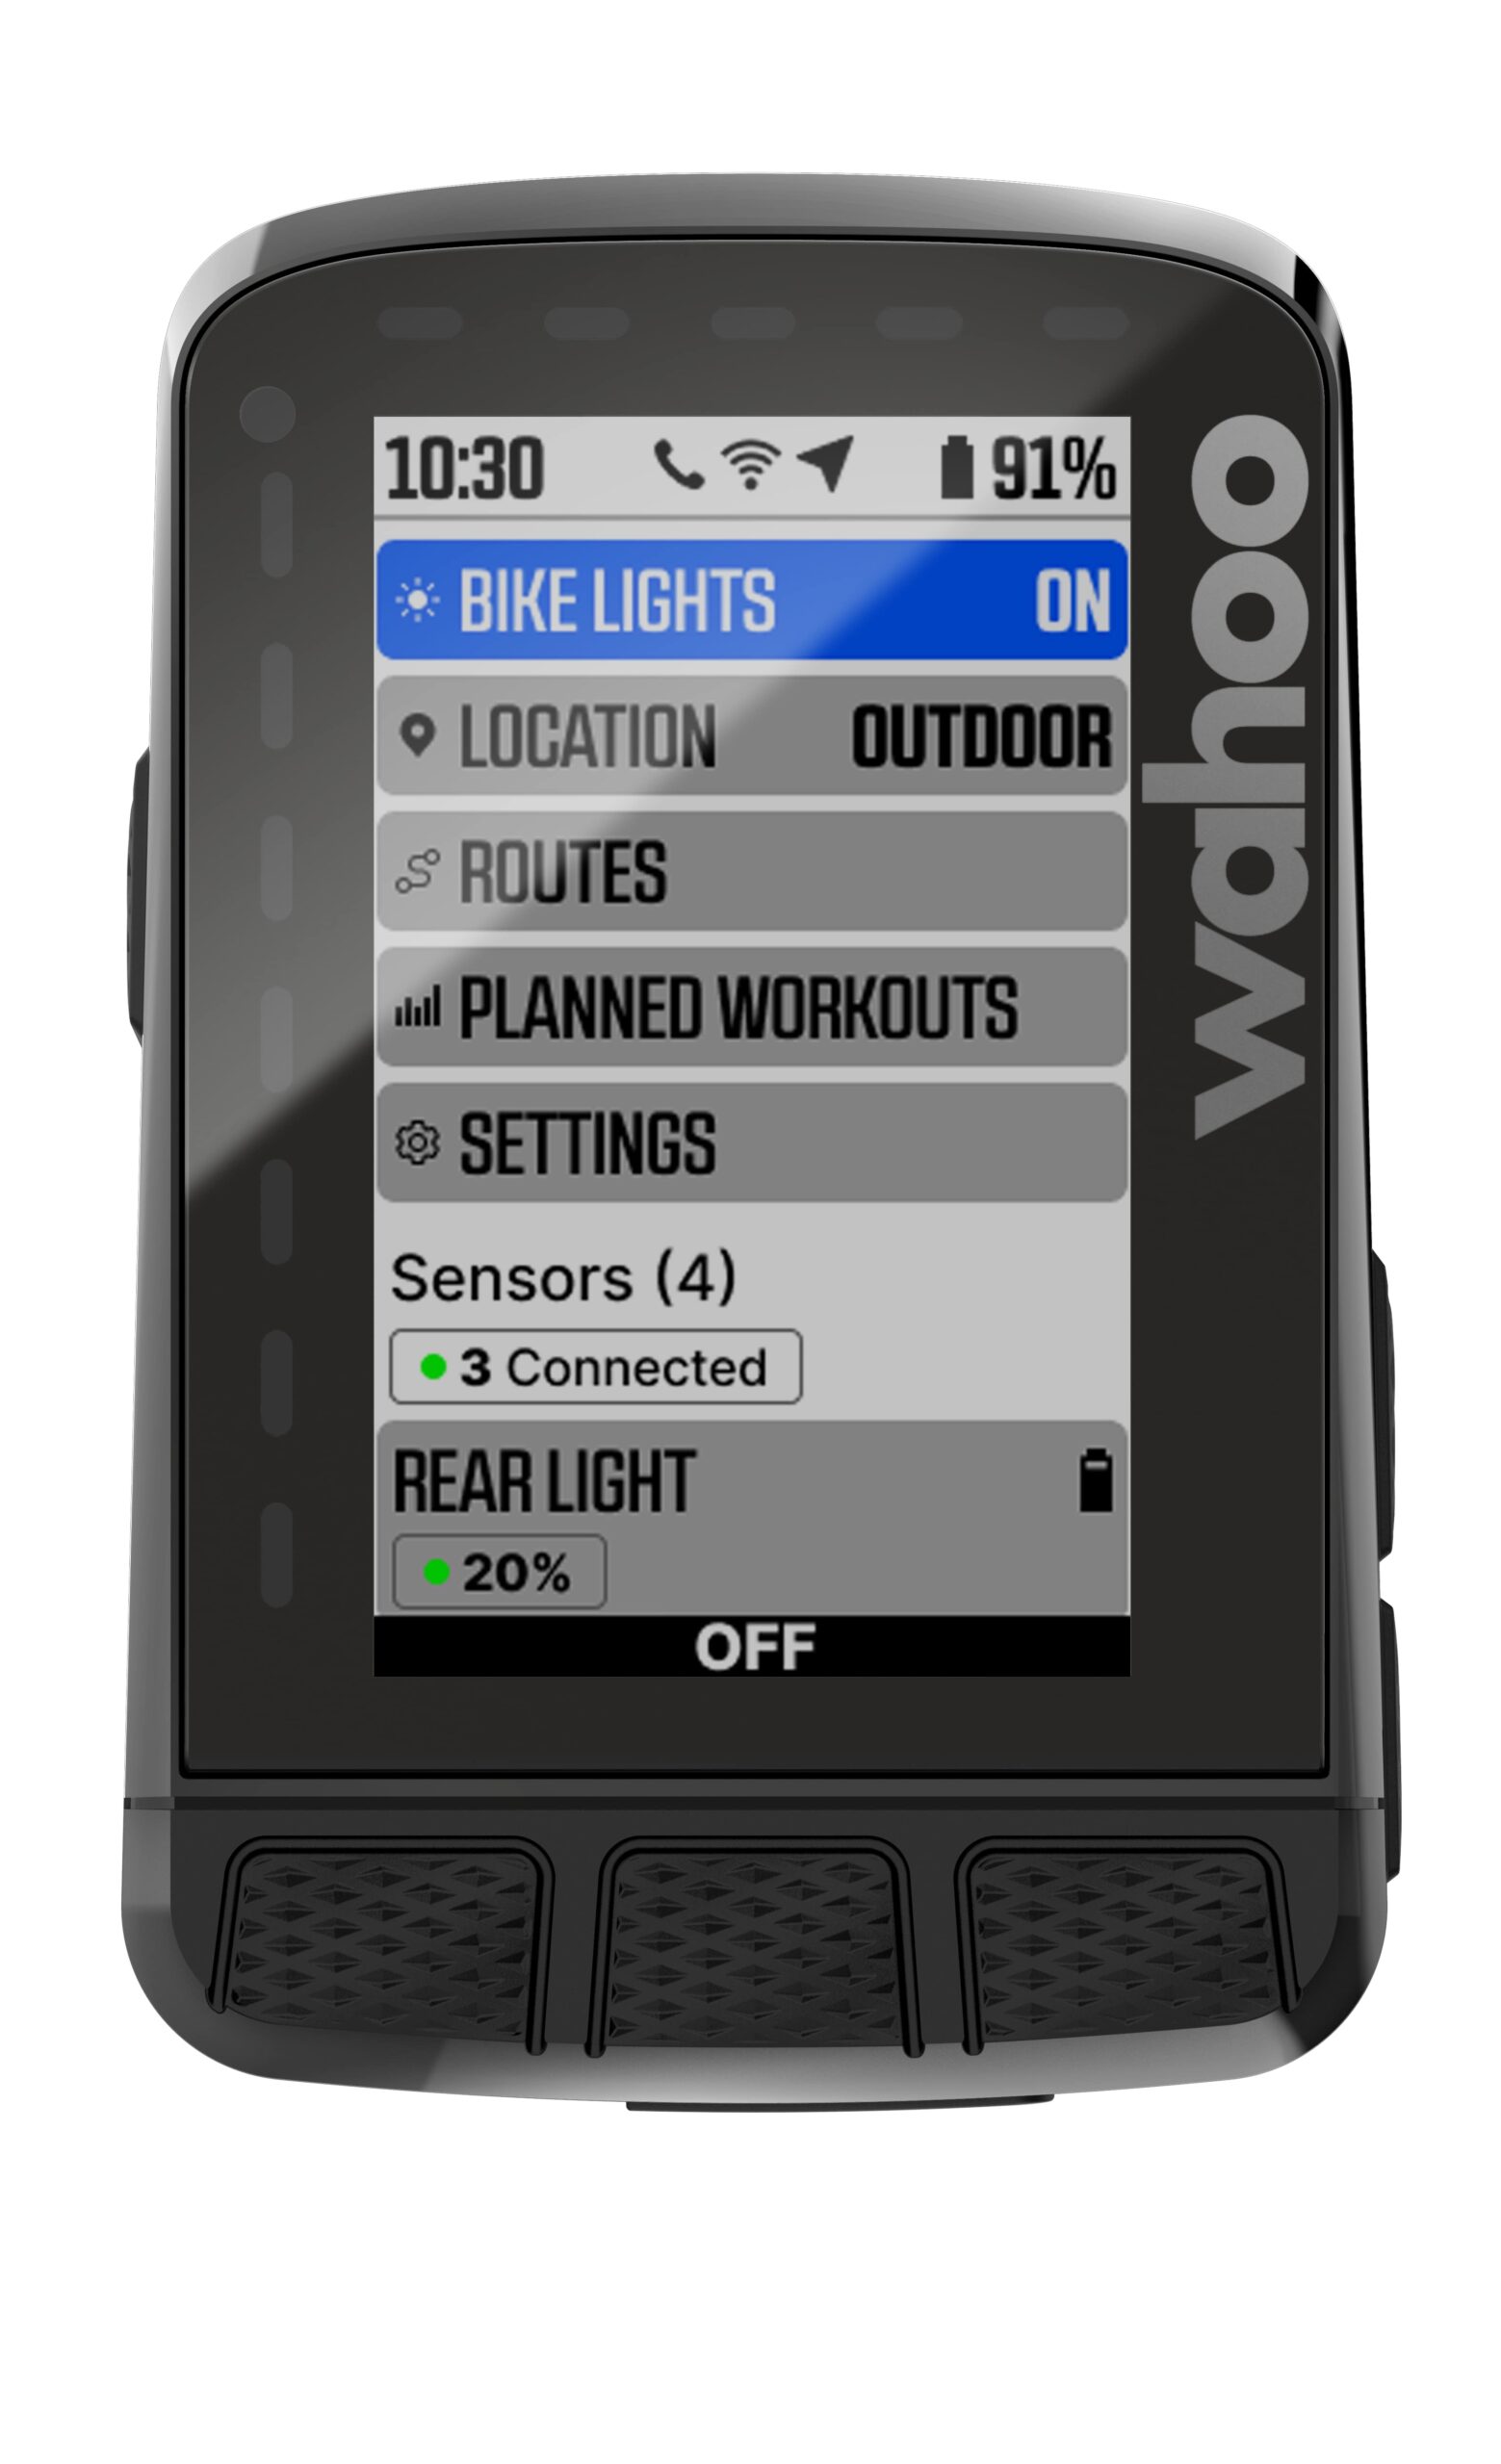 You can now control your GoPro, lights and music from your Wahoo bike computer